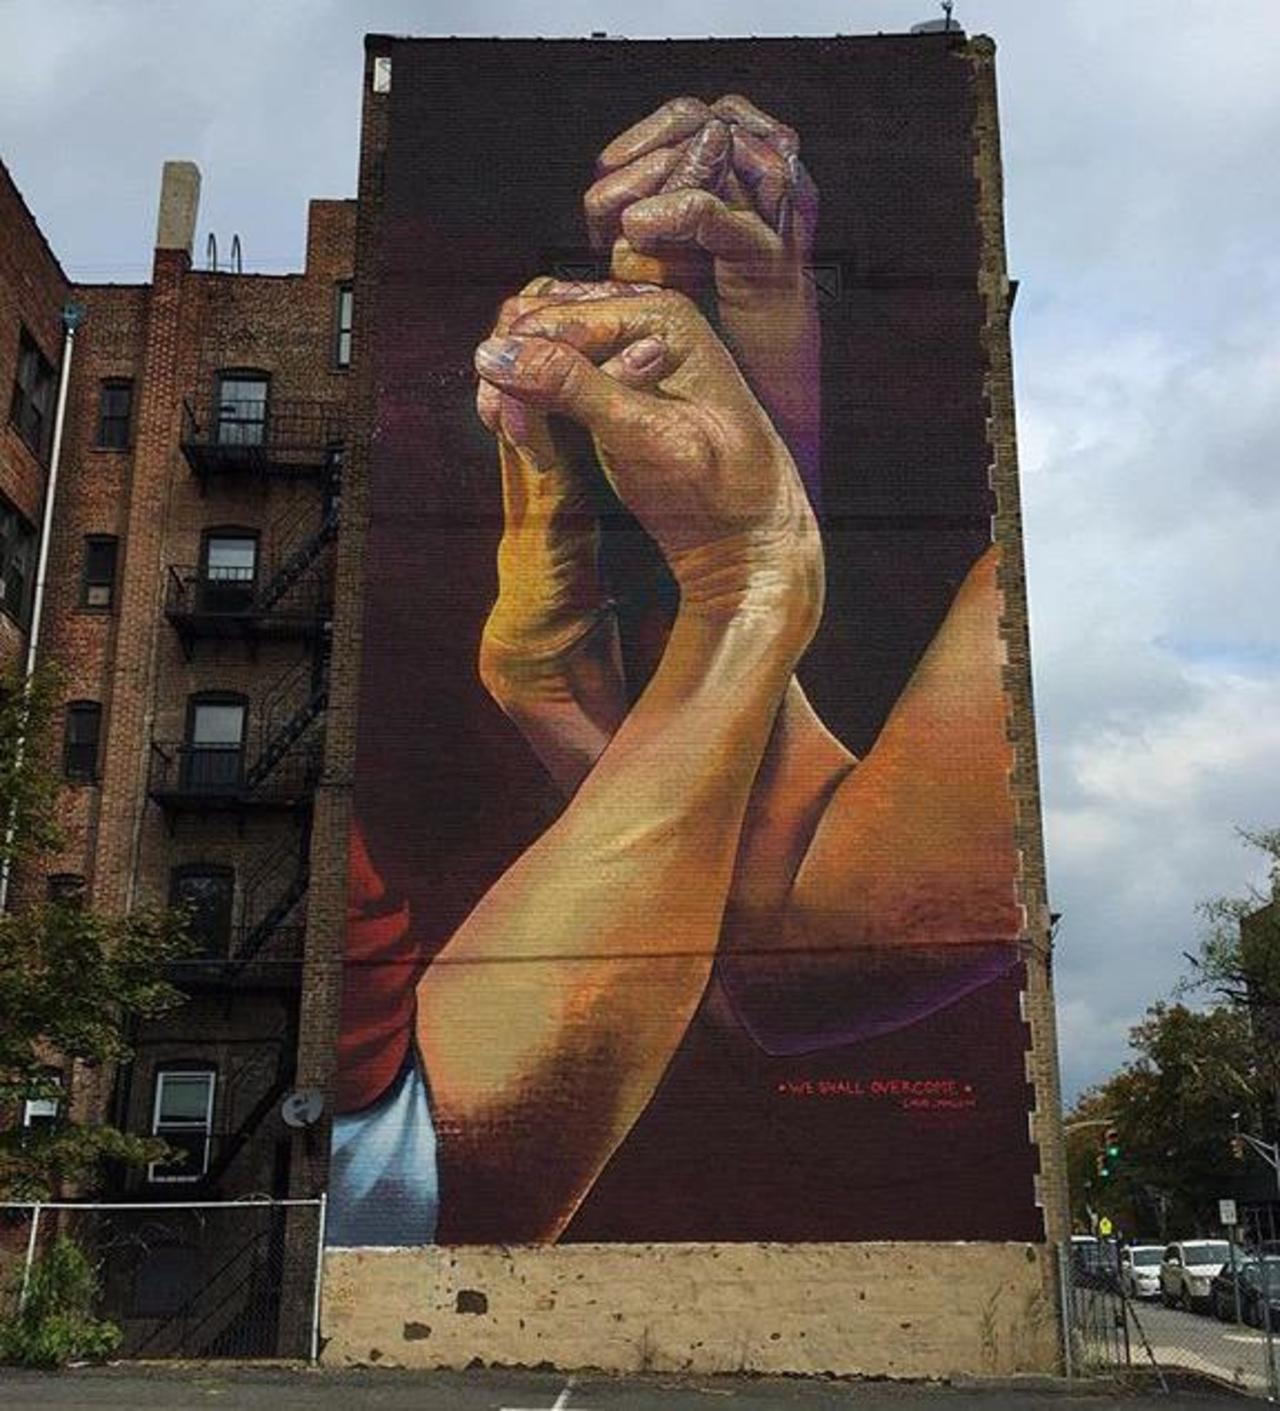 New Street Art by CaseMaclaim in Jersey City for the TheBKcollective 

#art #graffiti #mural #streetart http://t.co/ggACQE7otZ